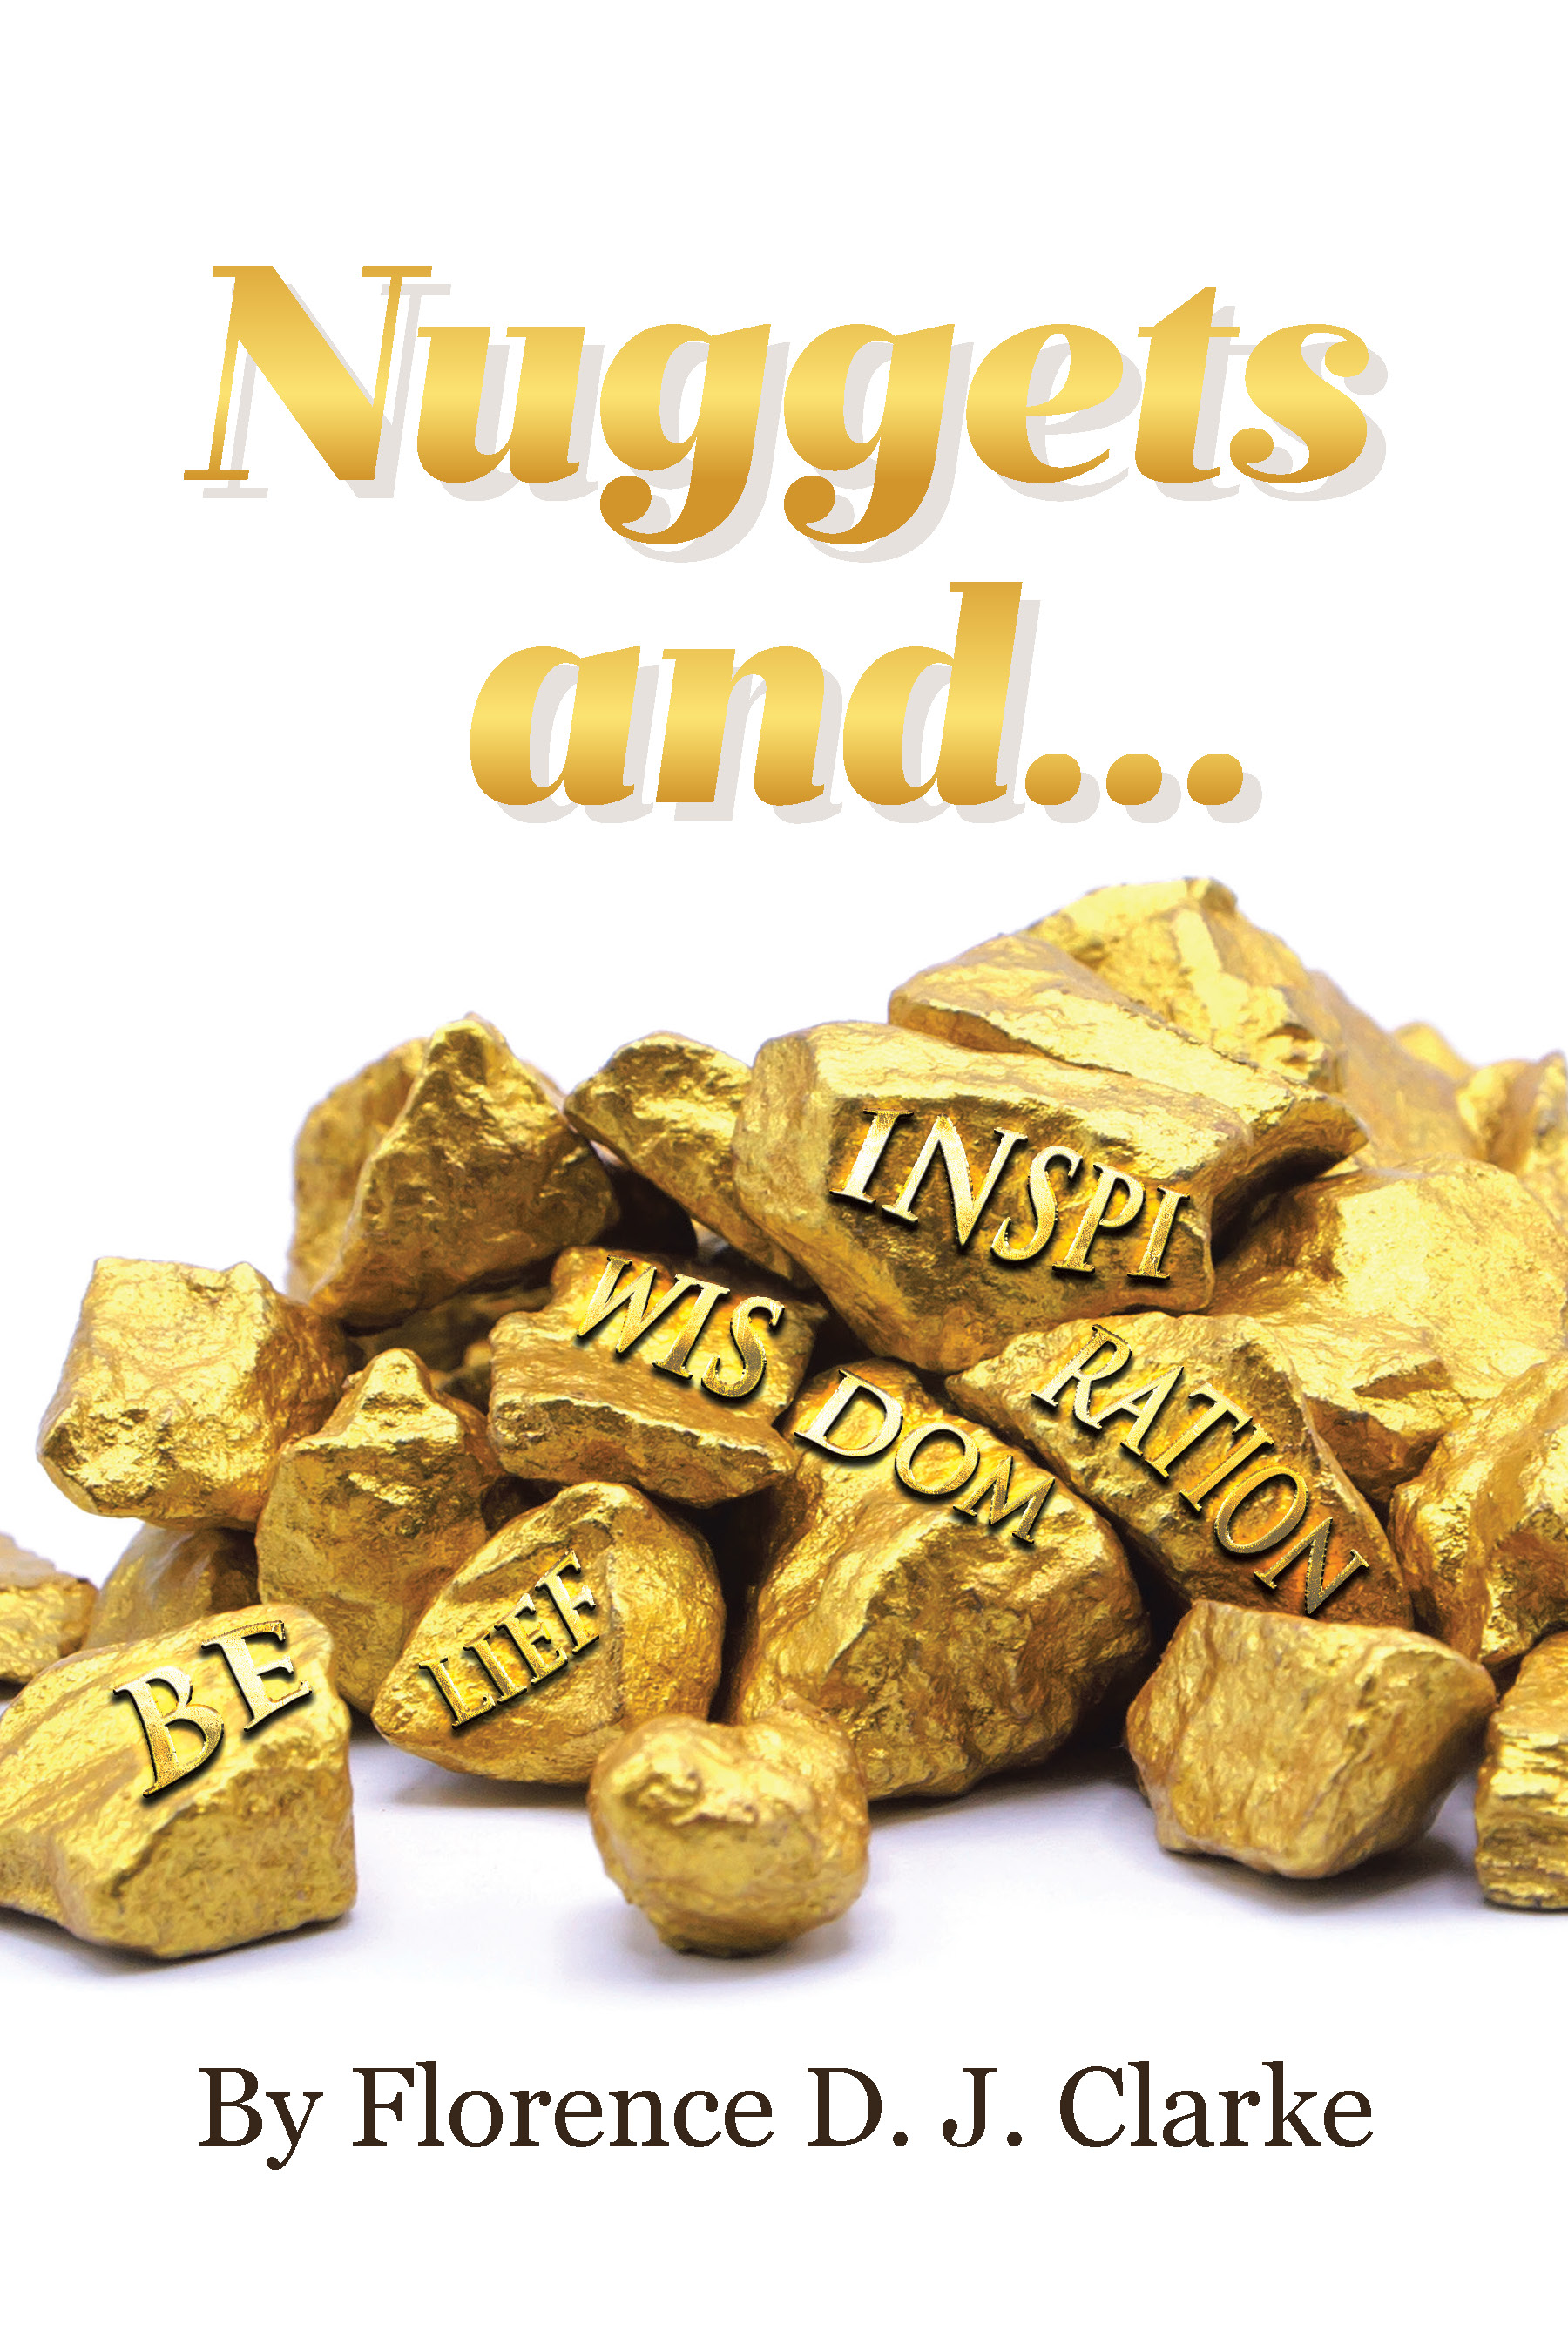 Author Florence D. J. Clarke’s New Book, "Nuggets and...," is a Collection of Inspired Thoughts Intended to Encourage Hearts, Strengthen Resolve, and Lift Spirits